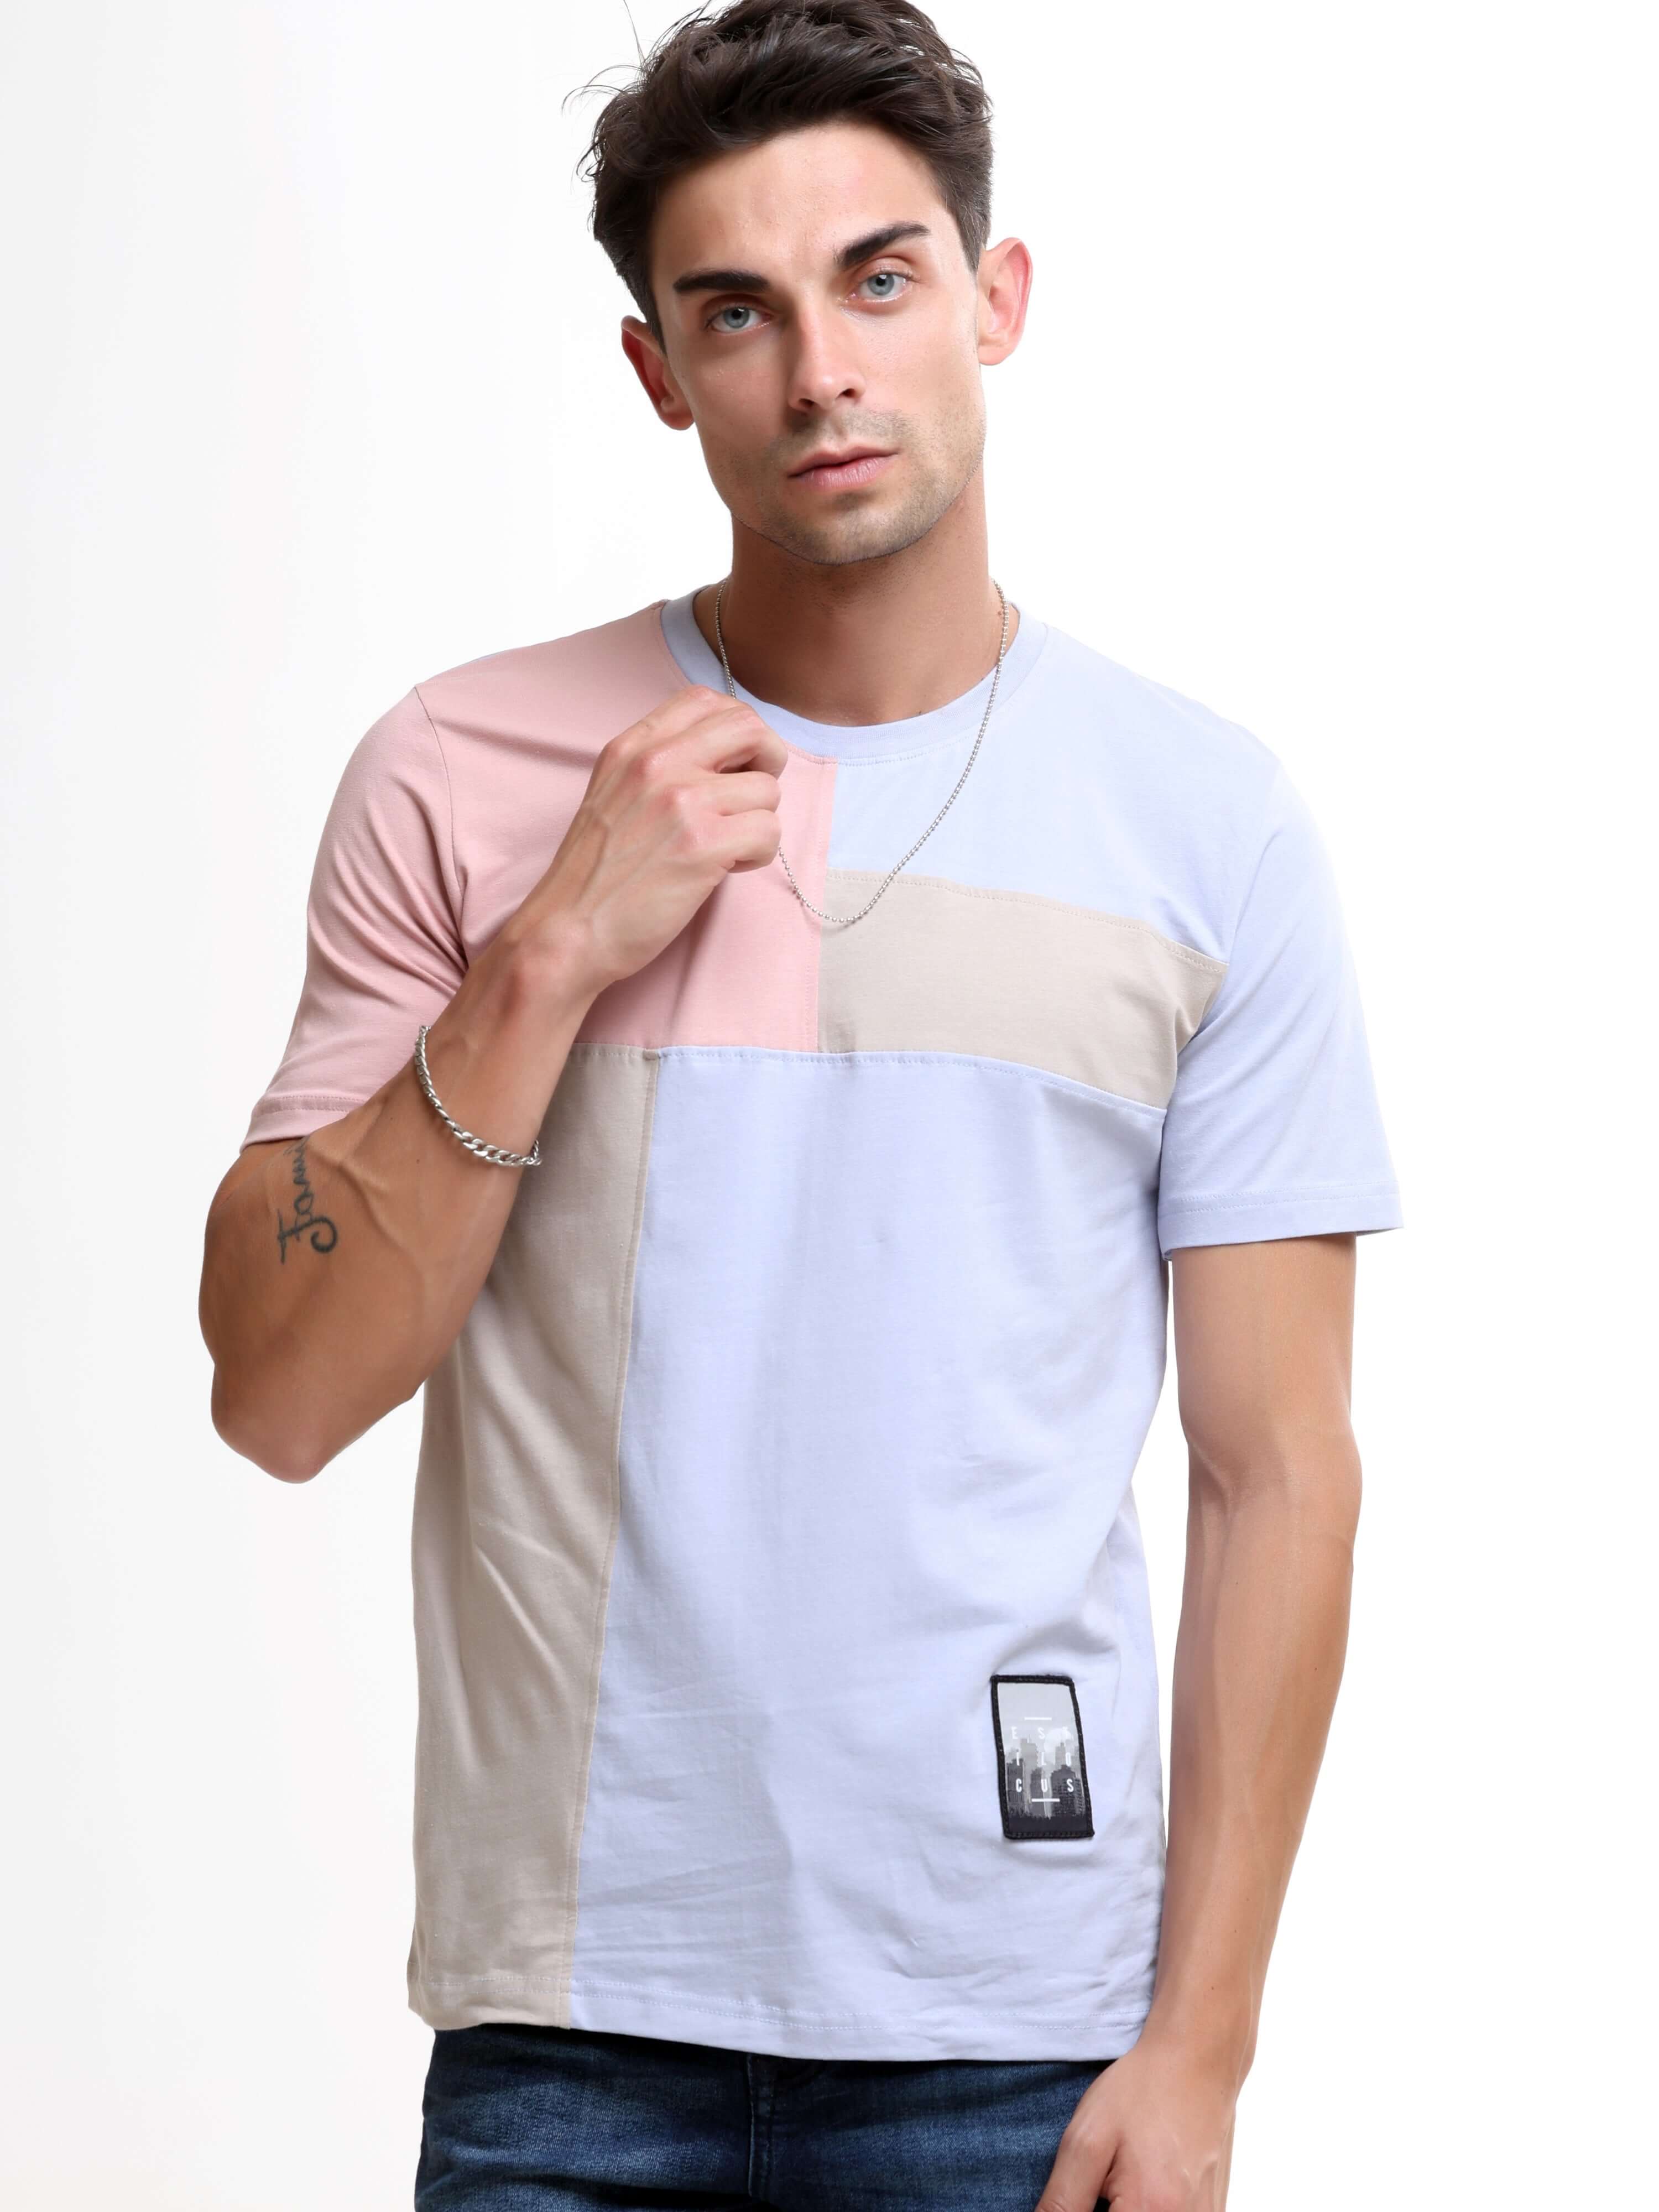 Blitz clear blue light weight tshirt shop online at Estilocus. This relax-fit Cut and Sew T-shirt is comfortable and the perfect essential all year round. Pair it with white jeans and sneakers and layer it up with a denim jacket for a casual and put-toget